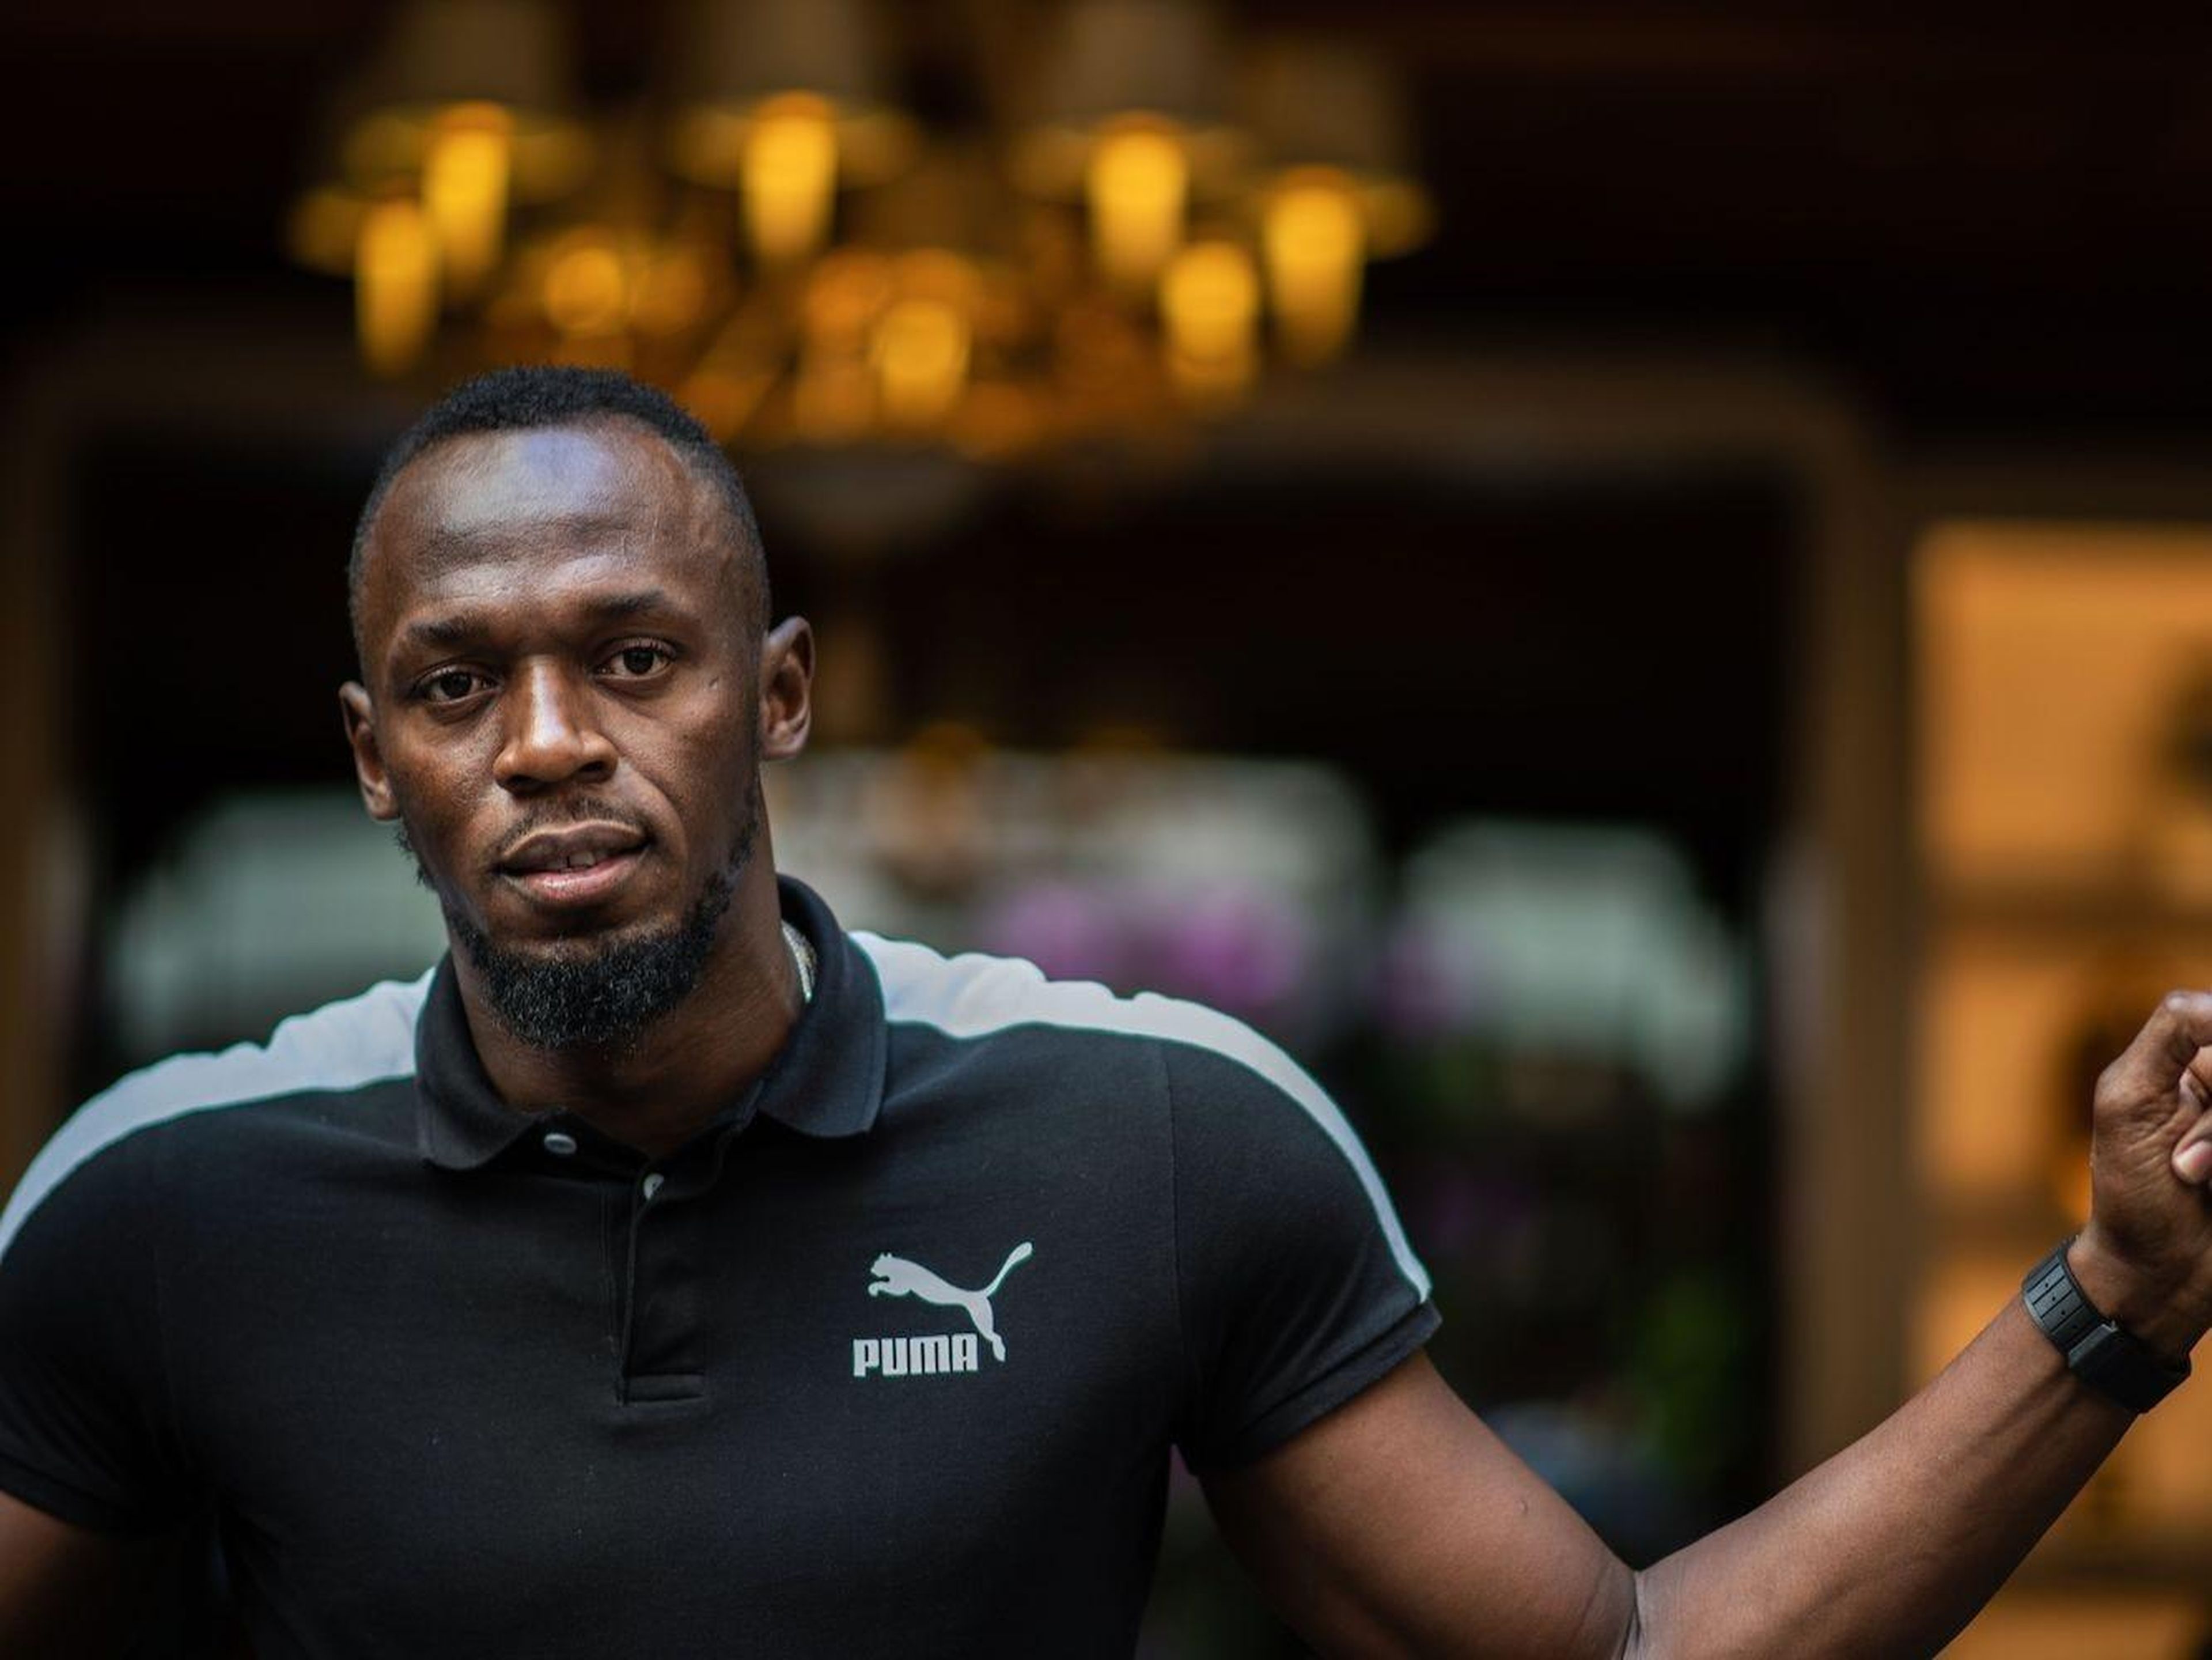 Jamaican Olympic sprinter Usain Bolt poses during a photo session as he launches a new brand of electric scooters named "Bolt" in Paris, on May 15, 2019. MARTIN BUREAU/AFP via Getty Images